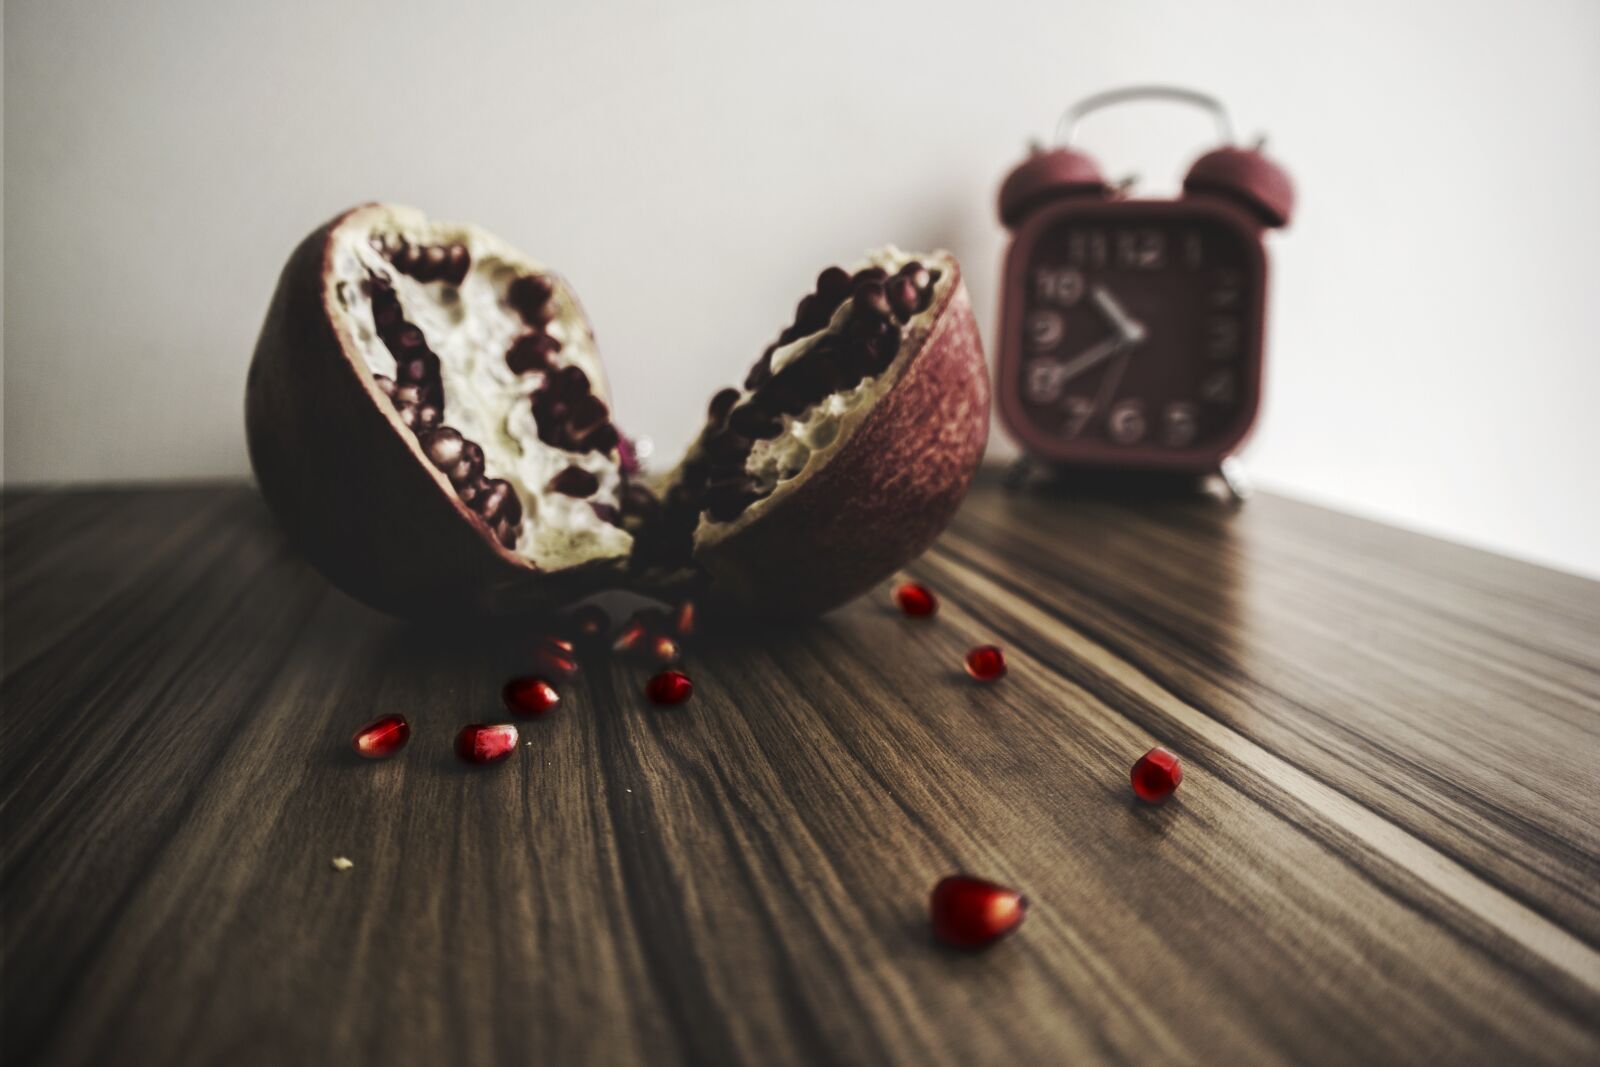 Samsung NX2000 sample photo. Wooden, table, pomegranate photography